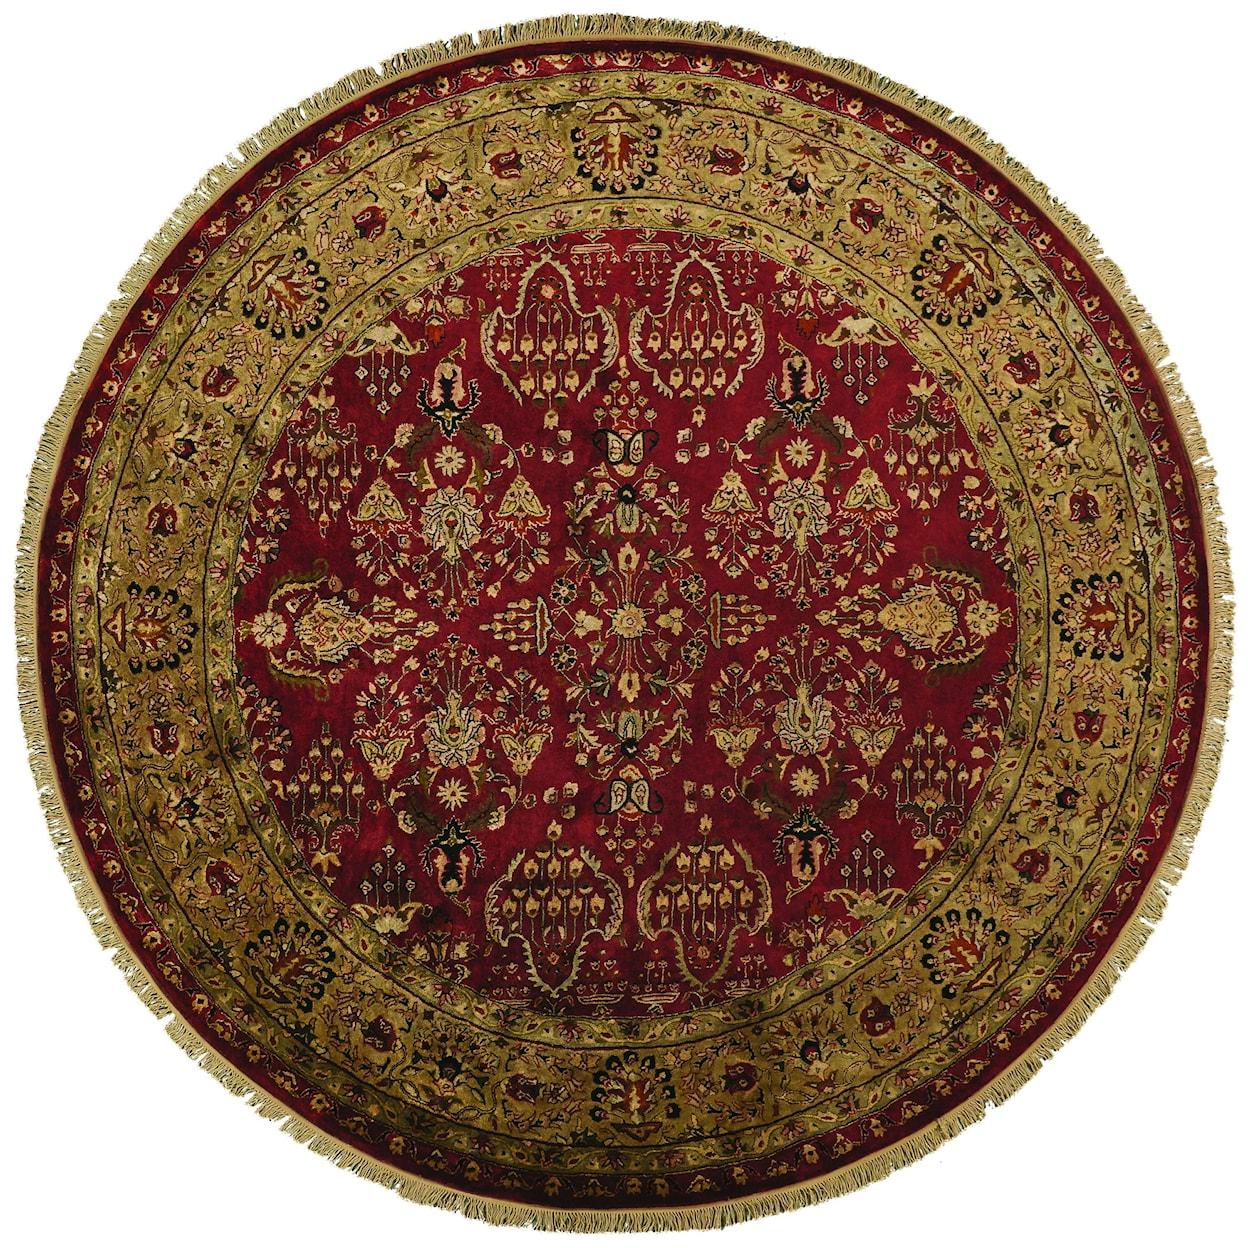 Feizy Rugs Amore Red/Light Gold 8' x 8' Round Area Rug